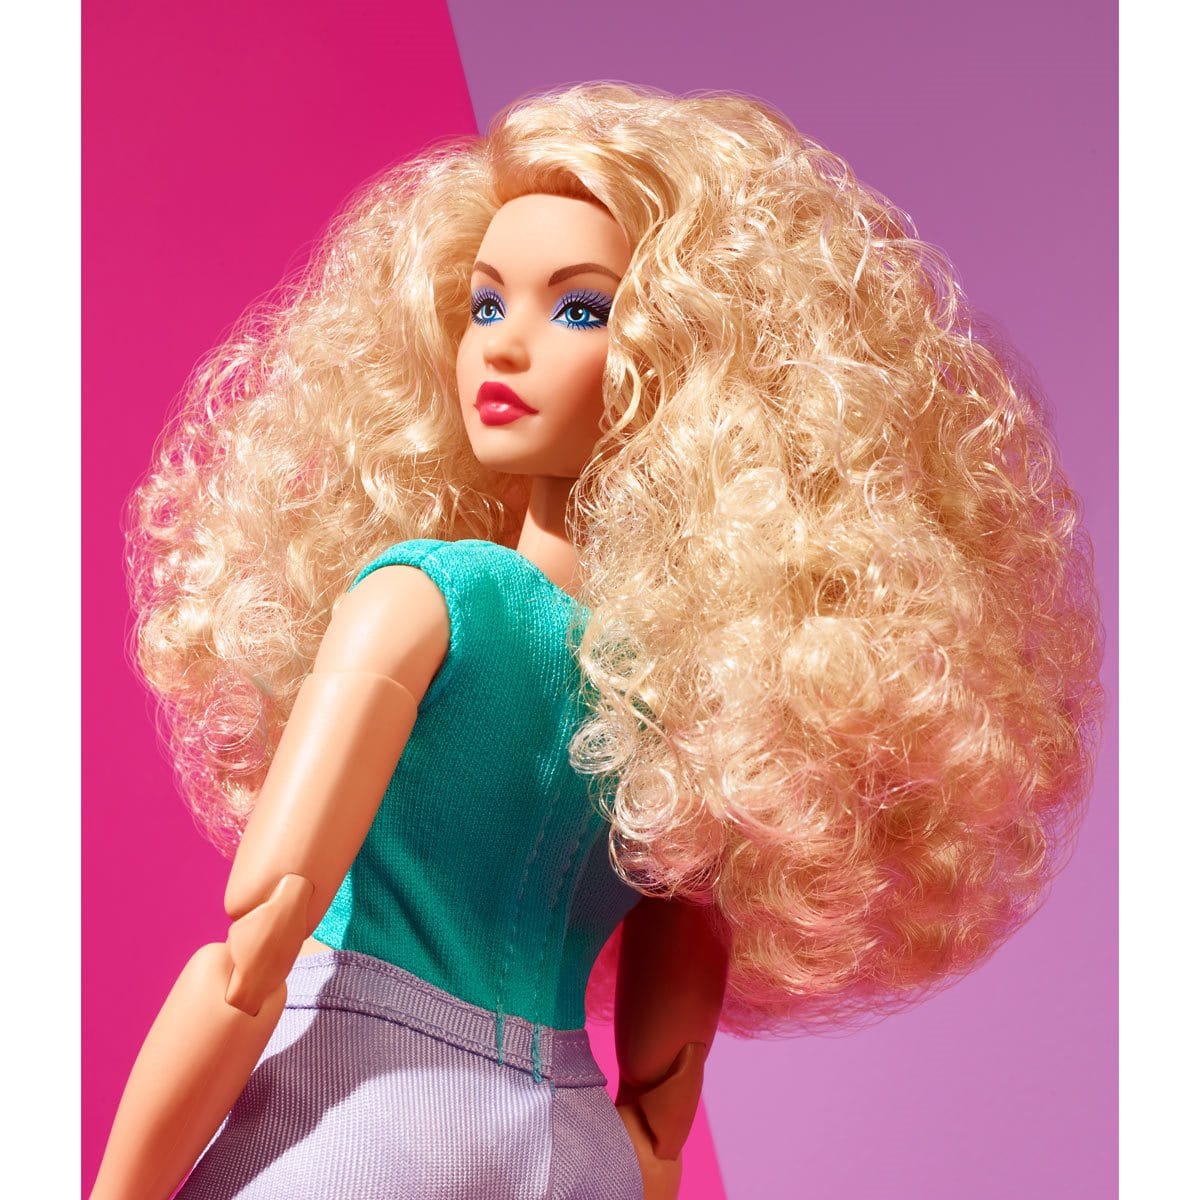 Barbie Looks Doll #16 with Blonde Hair